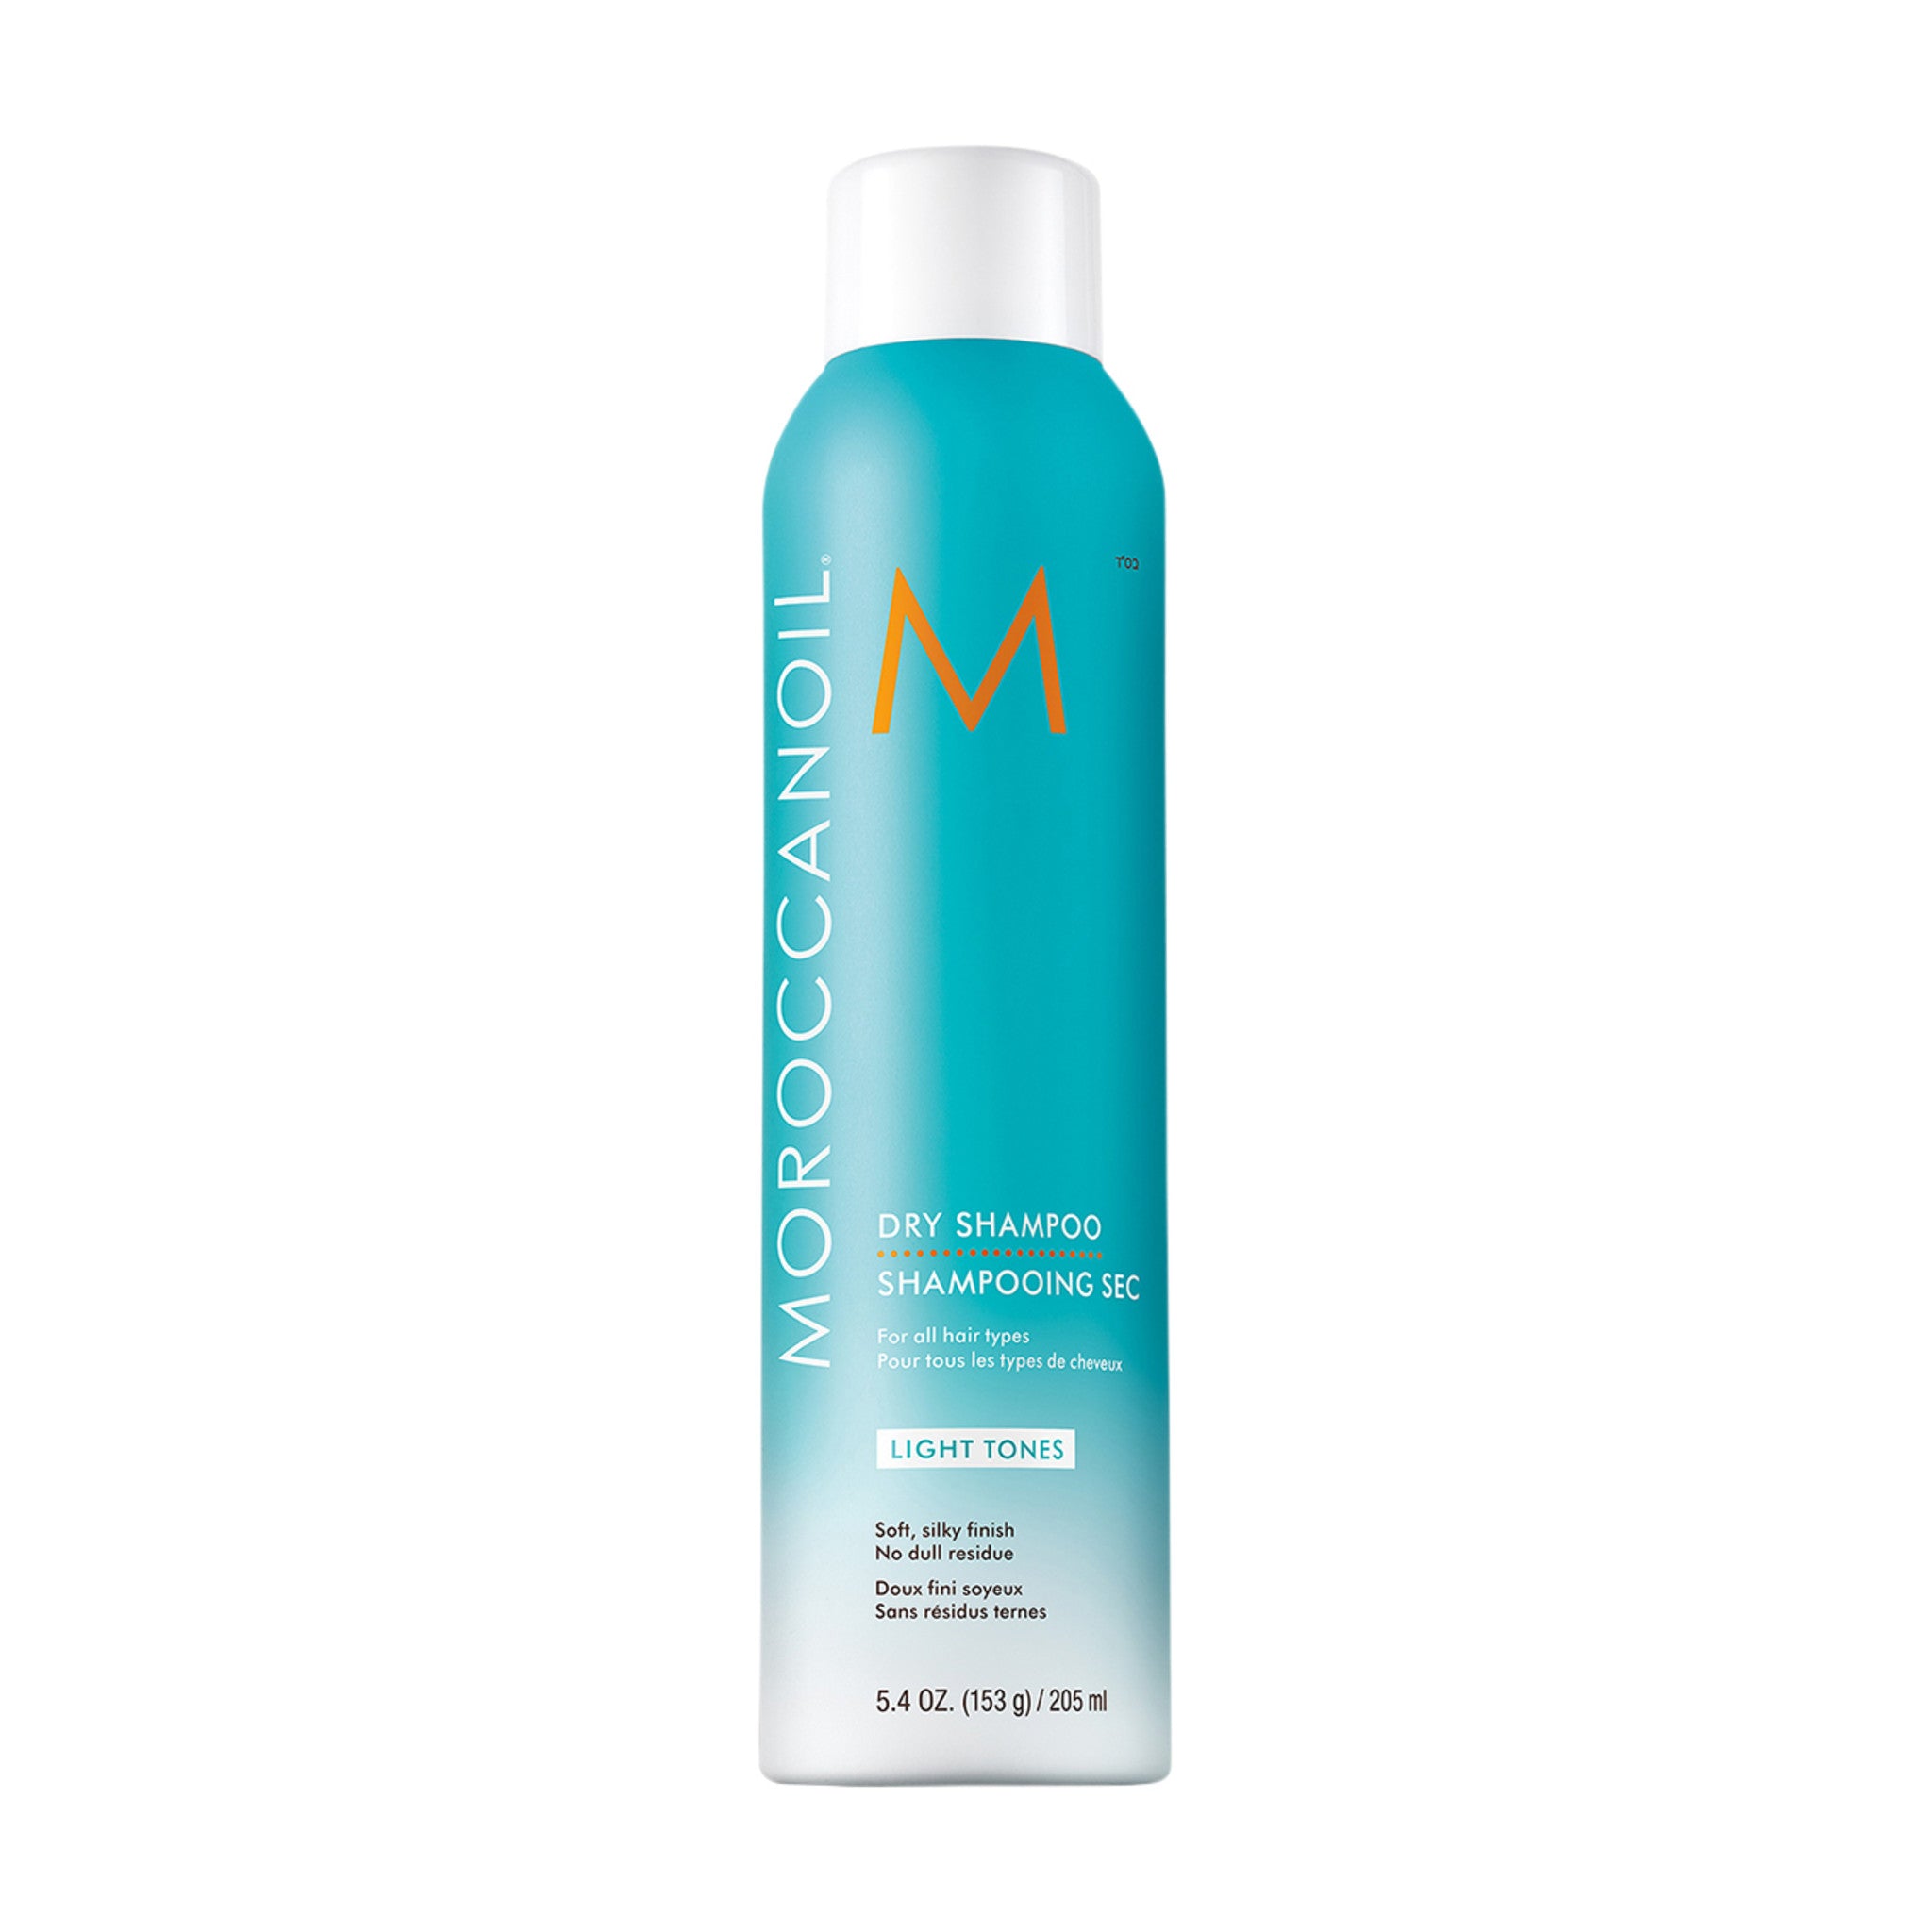 Moroccanoil Dry Shampoo Light Tones main image. This product is for blonde hair